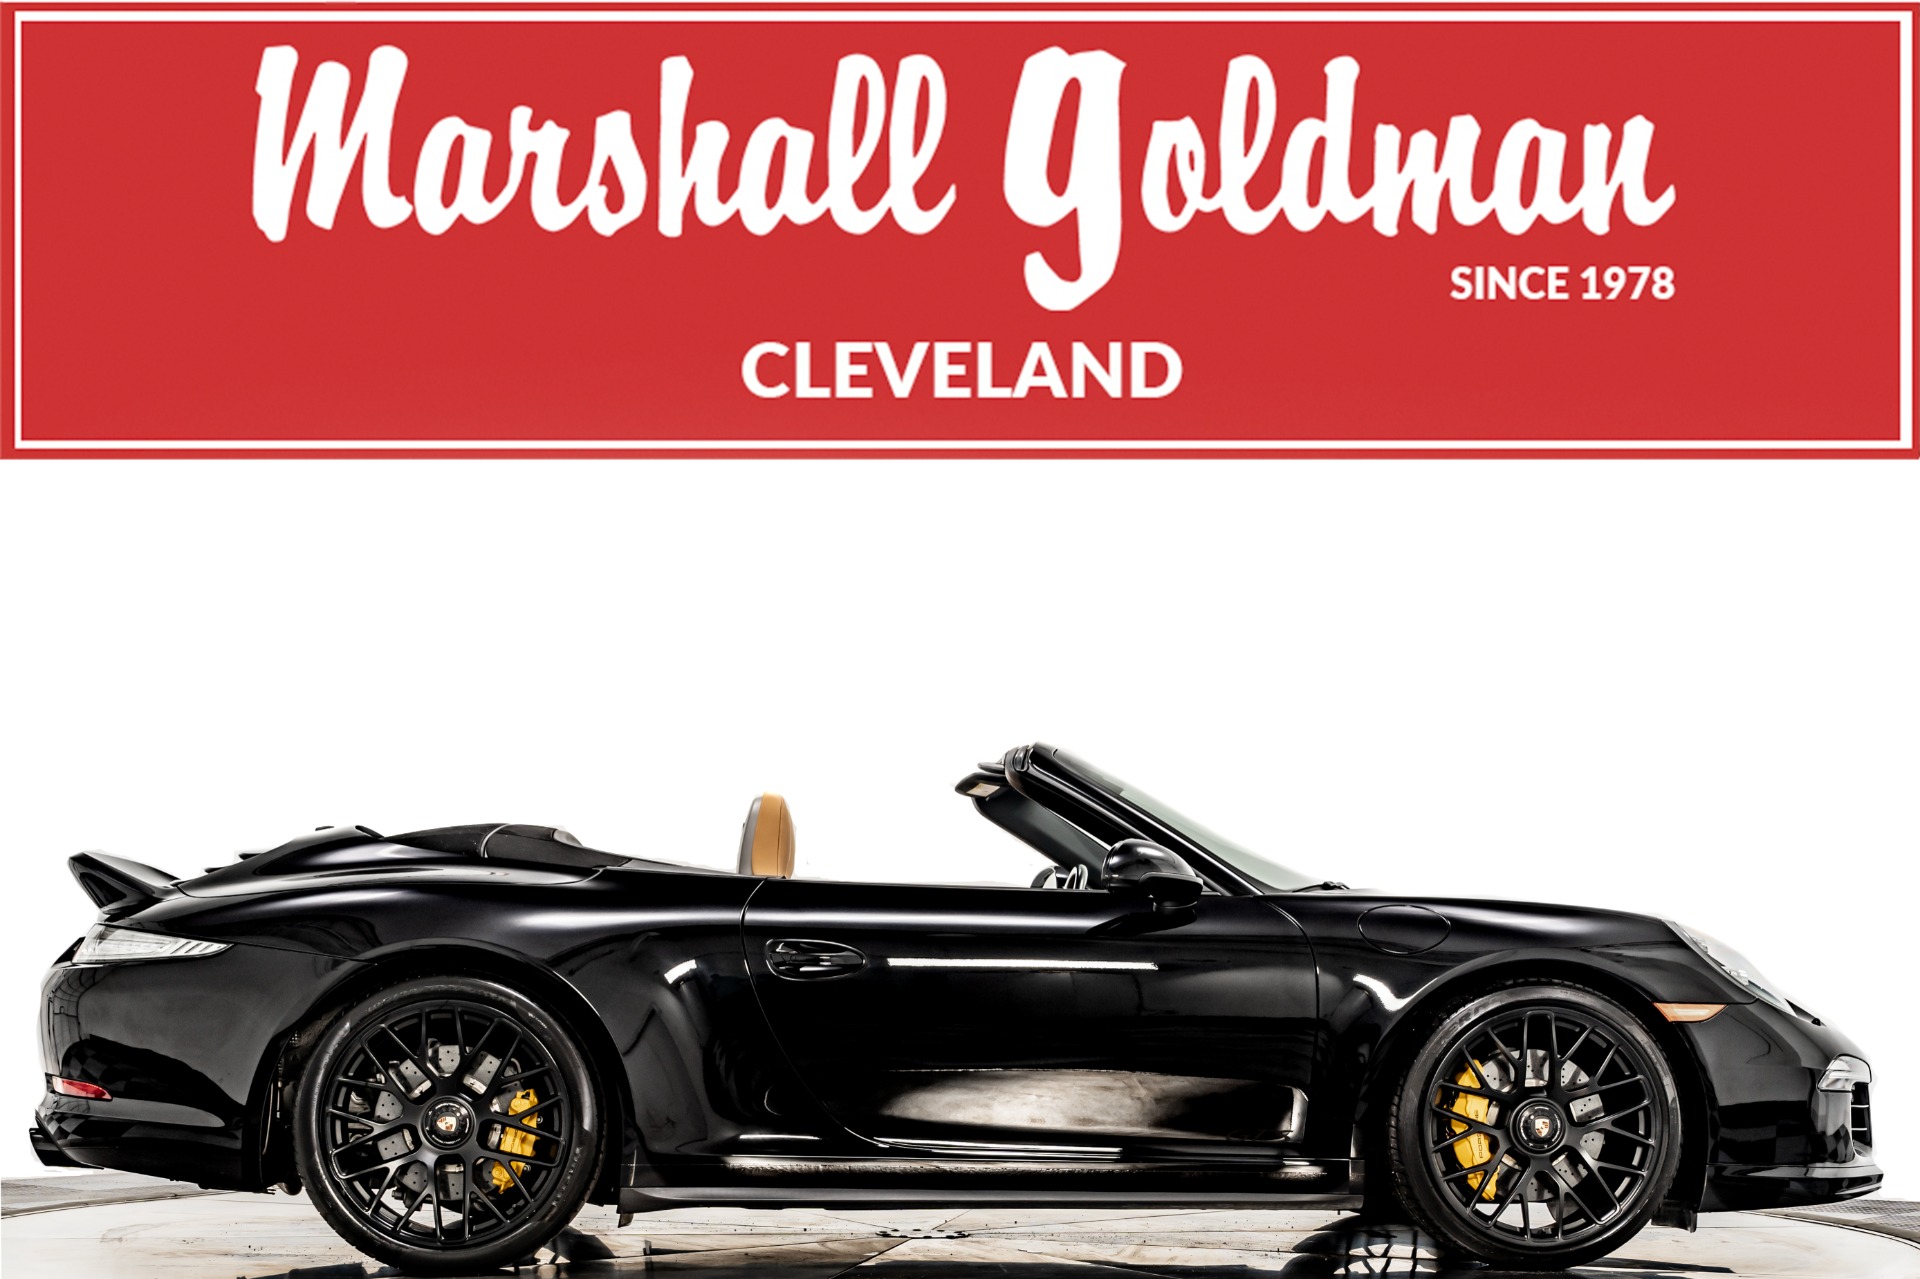 Used 2015 Porsche 911 Carrera 4 GTS Cabriolet For Sale (Sold) | Marshall  Goldman Cleveland Stock #W22358